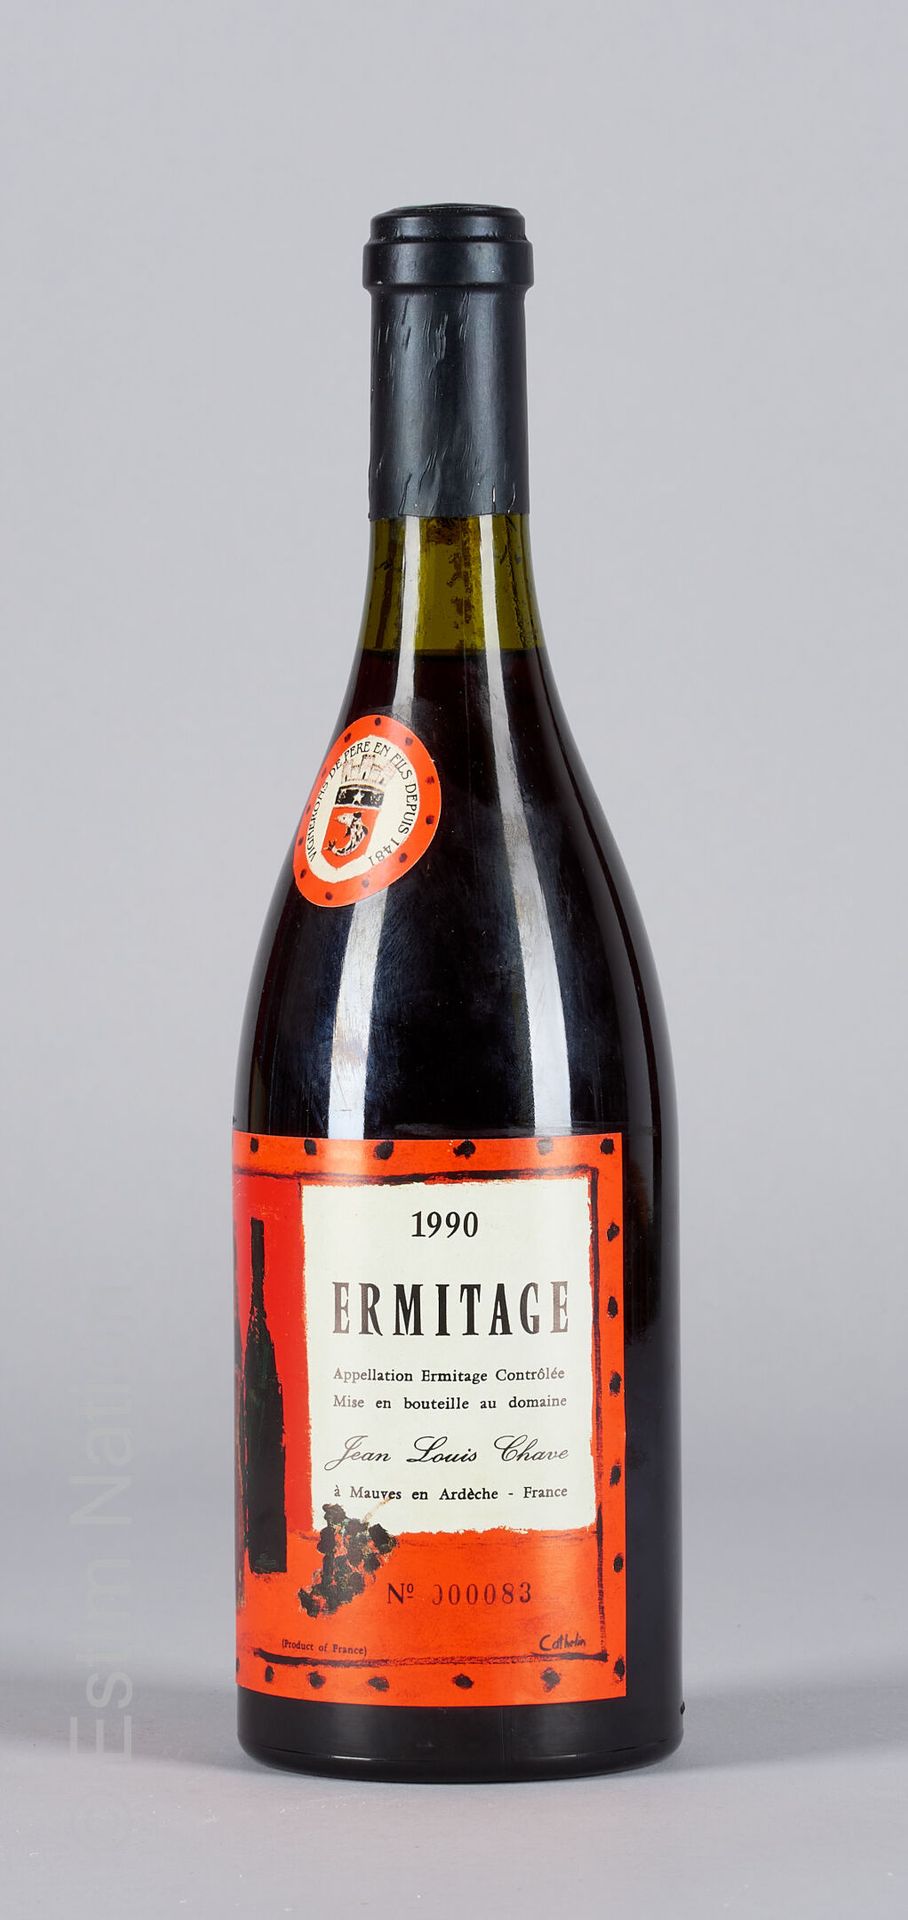 CUVEE CATHELIN 1 bottle ERMITAGE 1990 Cuvée Cathelin Jean-Louis Chave

(N. Betwe&hellip;